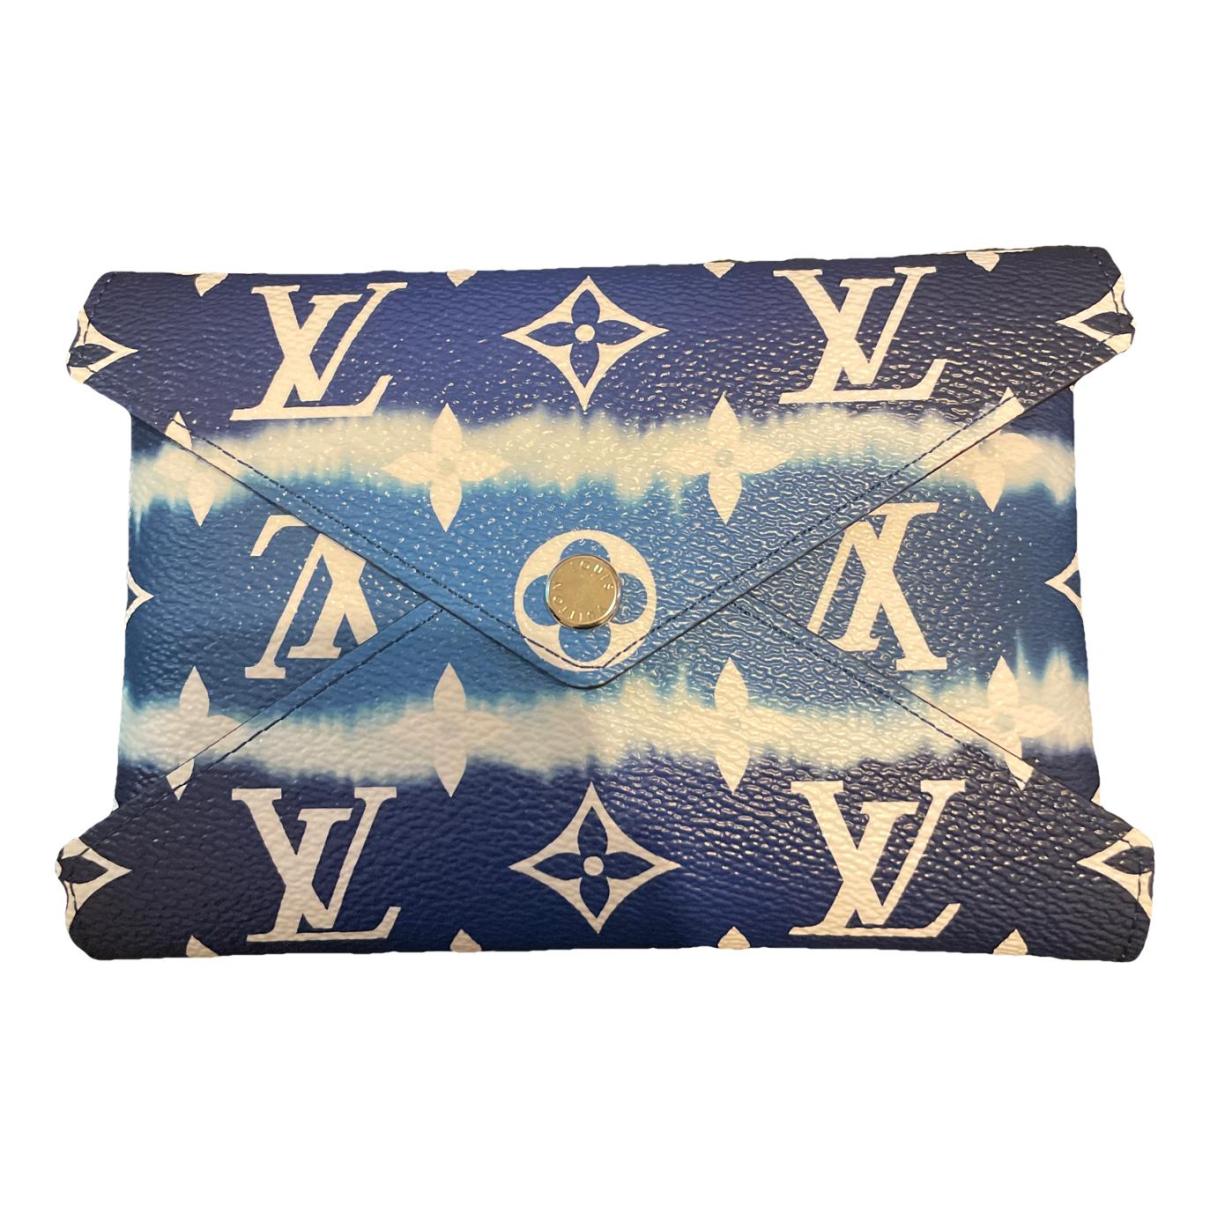 Women's Luxury Small Leather Goods and Wallets - LOUIS VUITTON ®